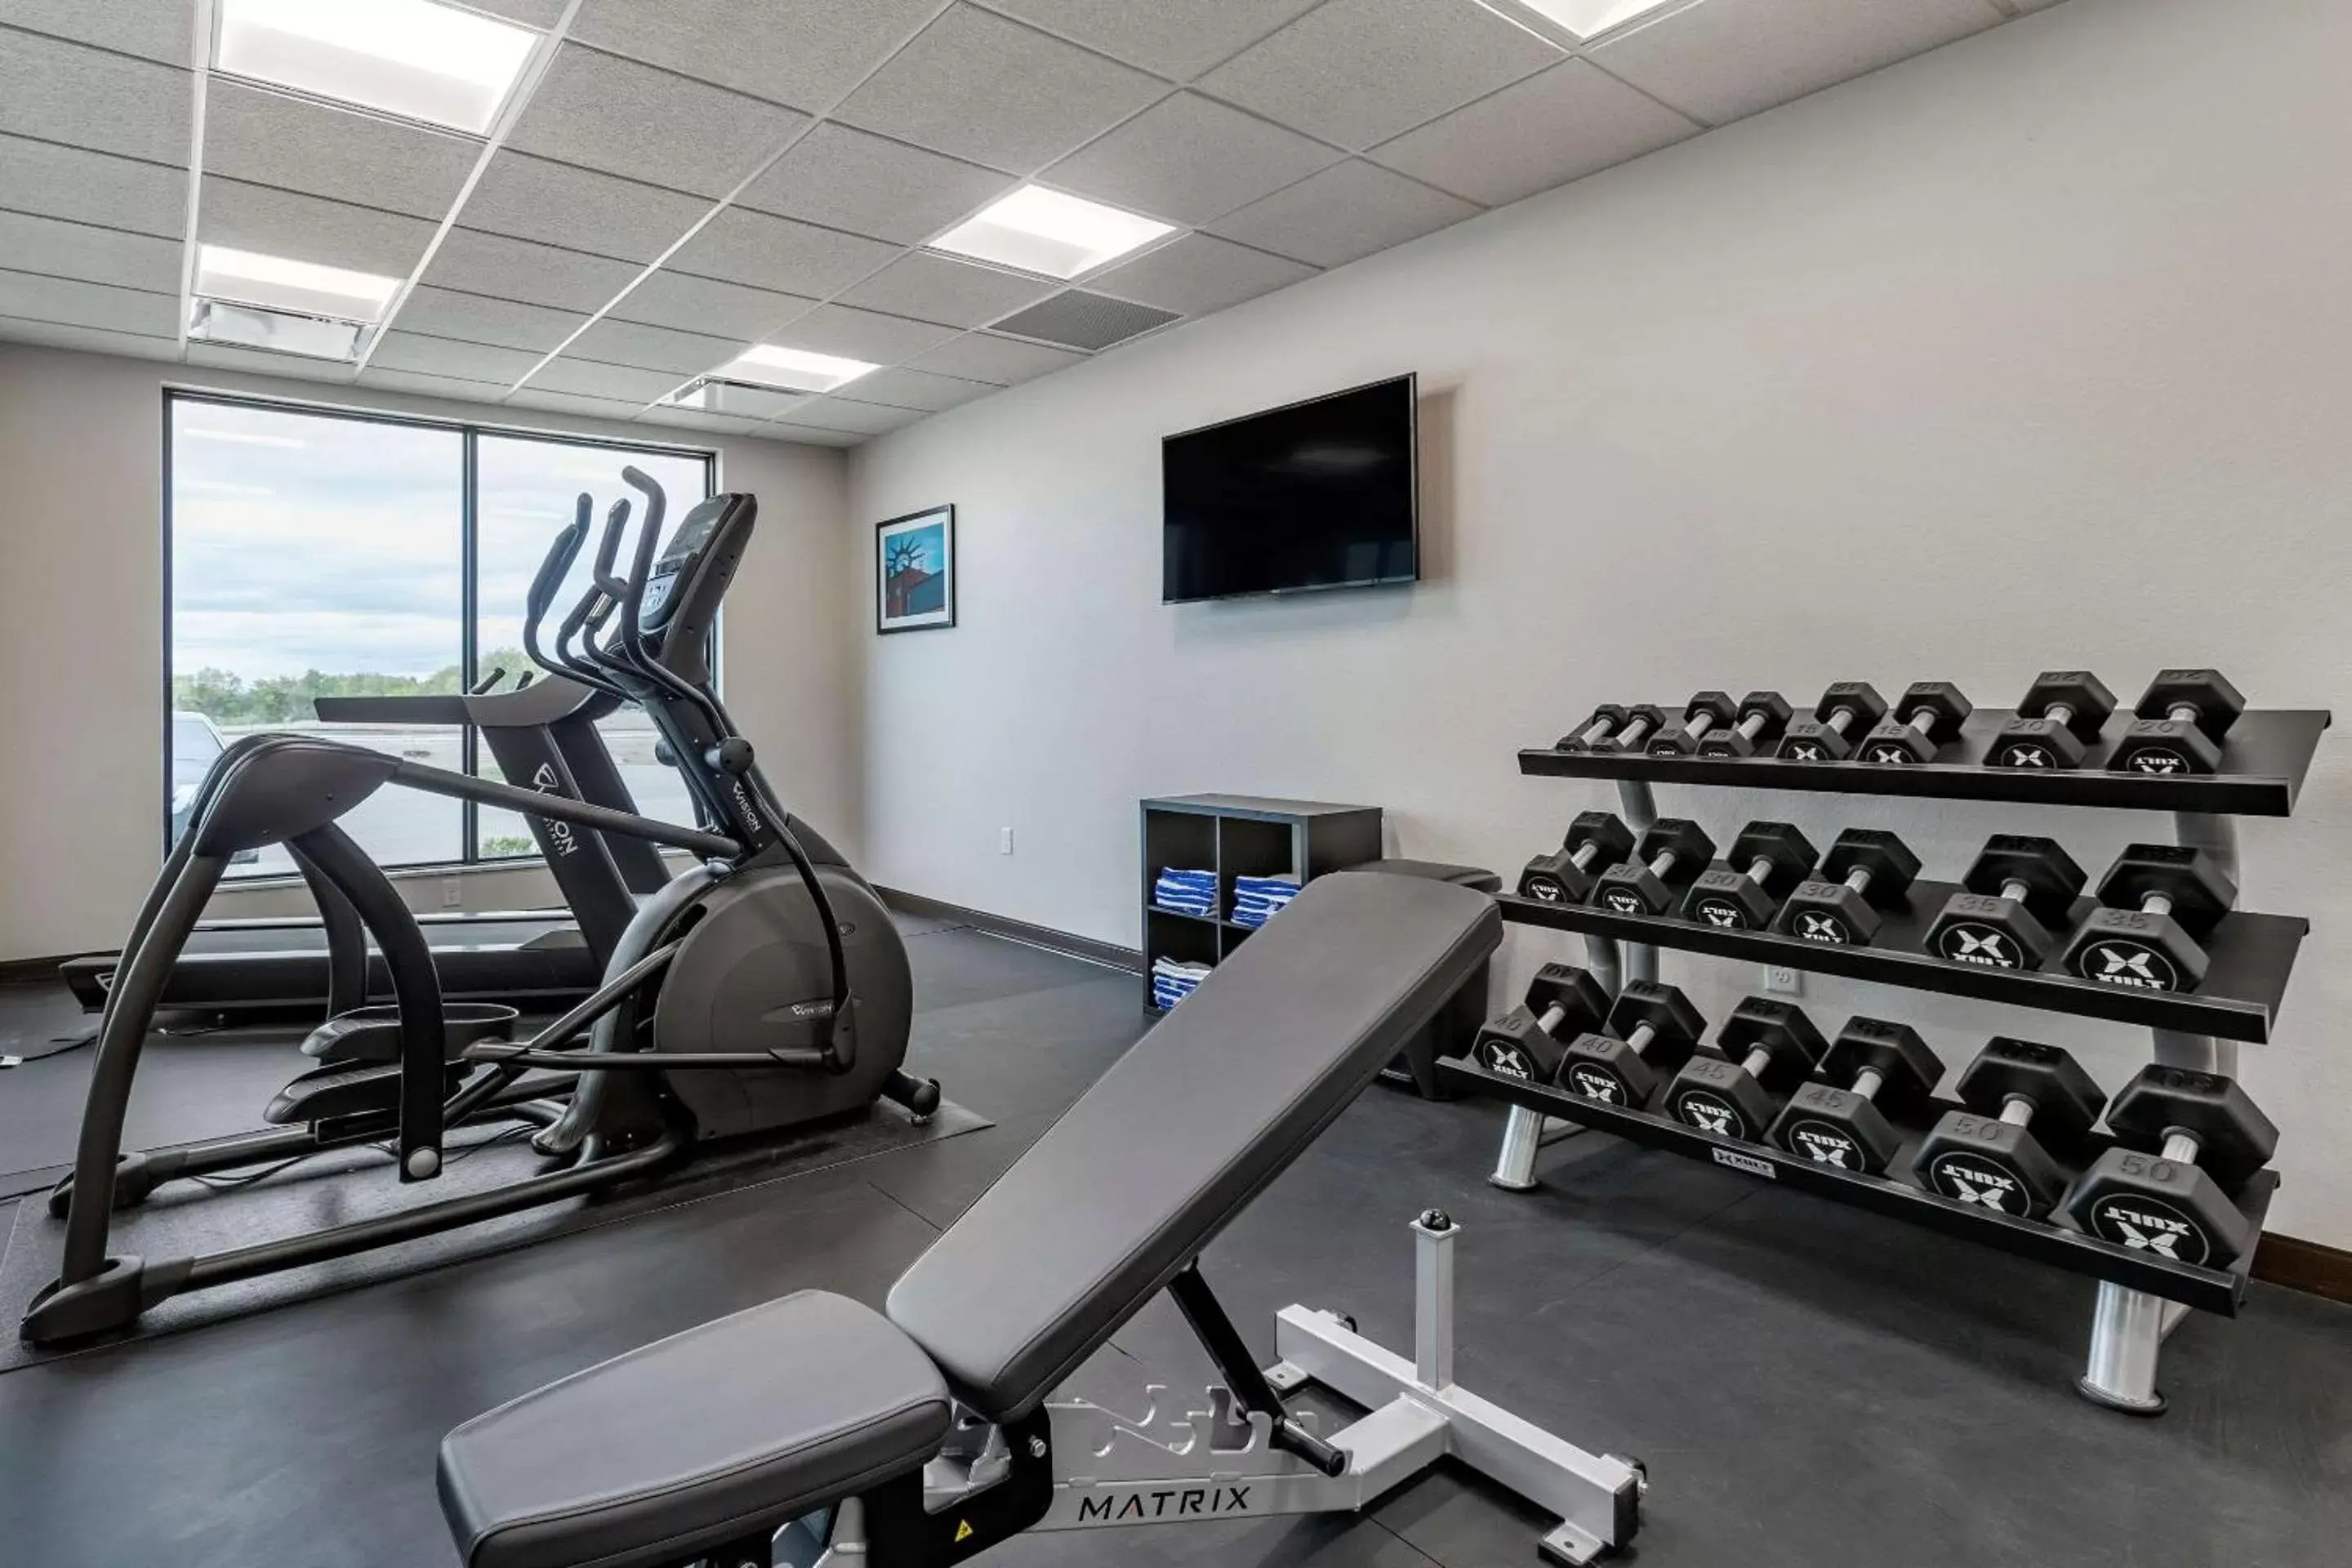 Fitness centre/facilities, Fitness Center/Facilities in MainStay Suites Waukee-West Des Moines